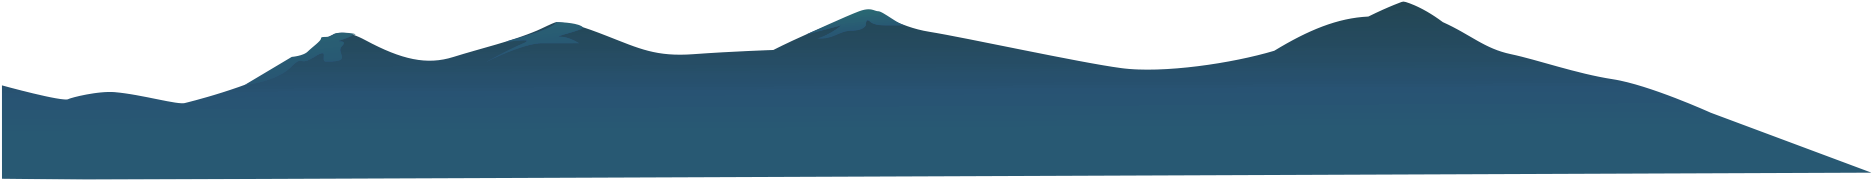 A Blue Mountain With A Black Background